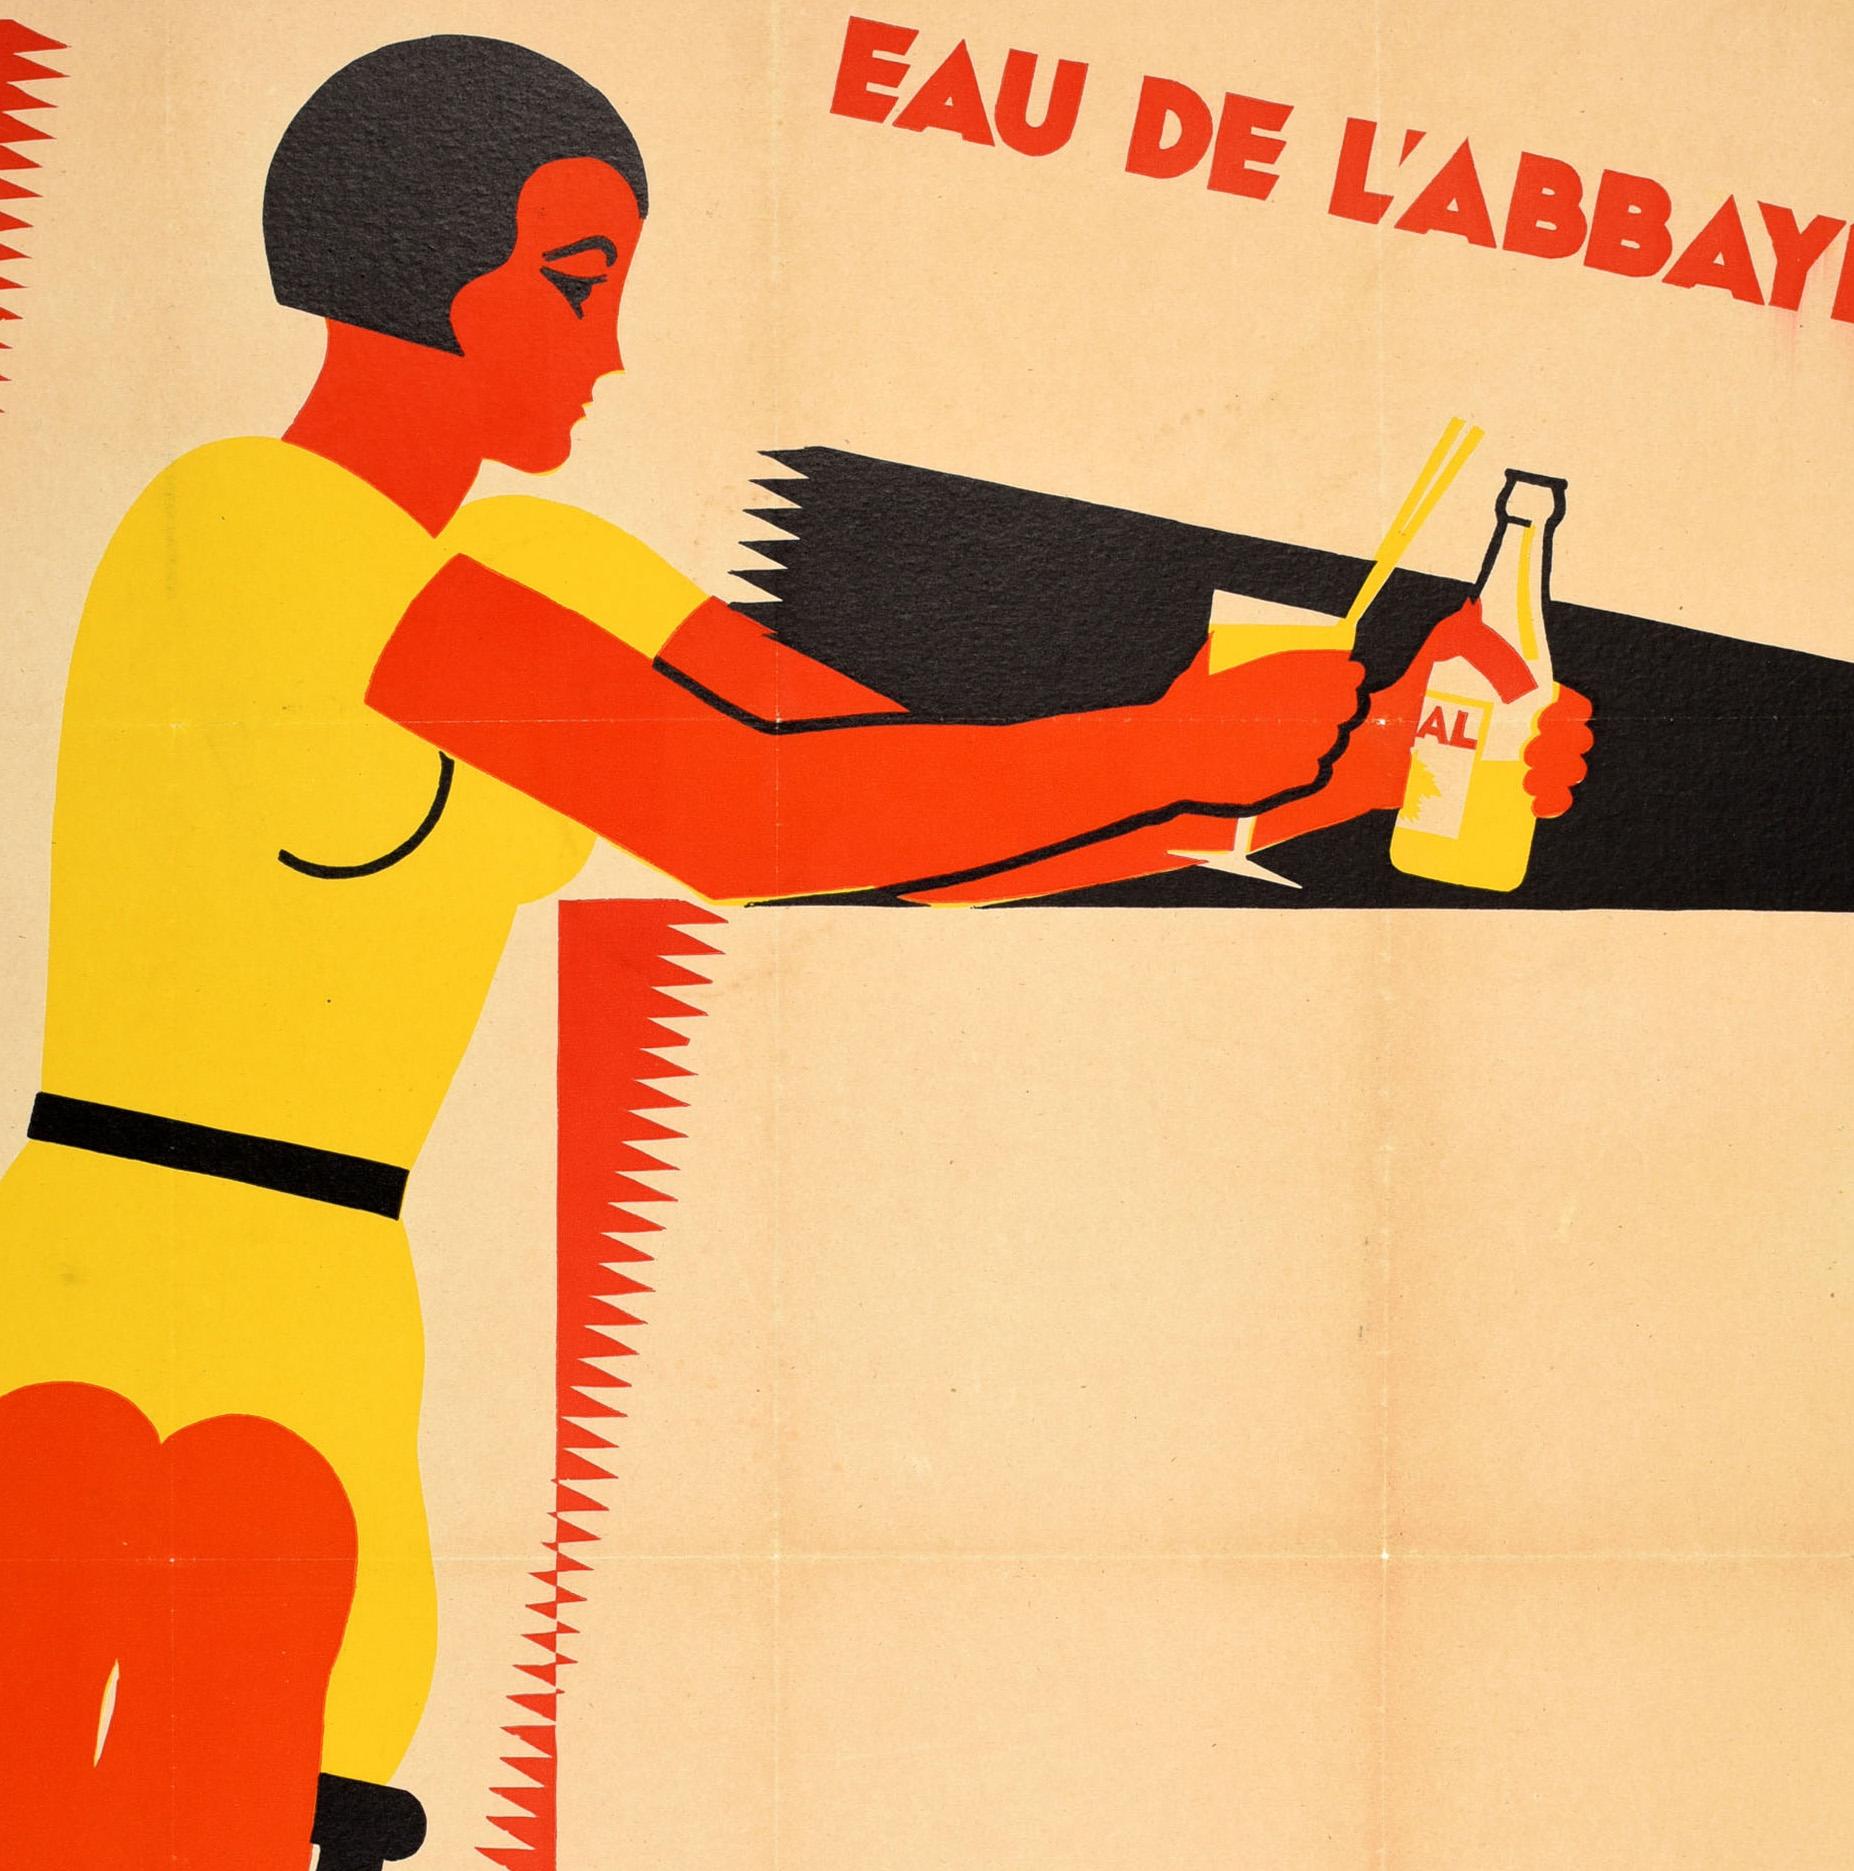 Original vintage drink advertising poster for Abbey Water Ideal Lemon / Eau de L'Abbaye Ideal Citron. Great Art Deco design depicting a diagonal image of a lady sitting at a bar holding a glass and bottle of the water, the text in red above and in